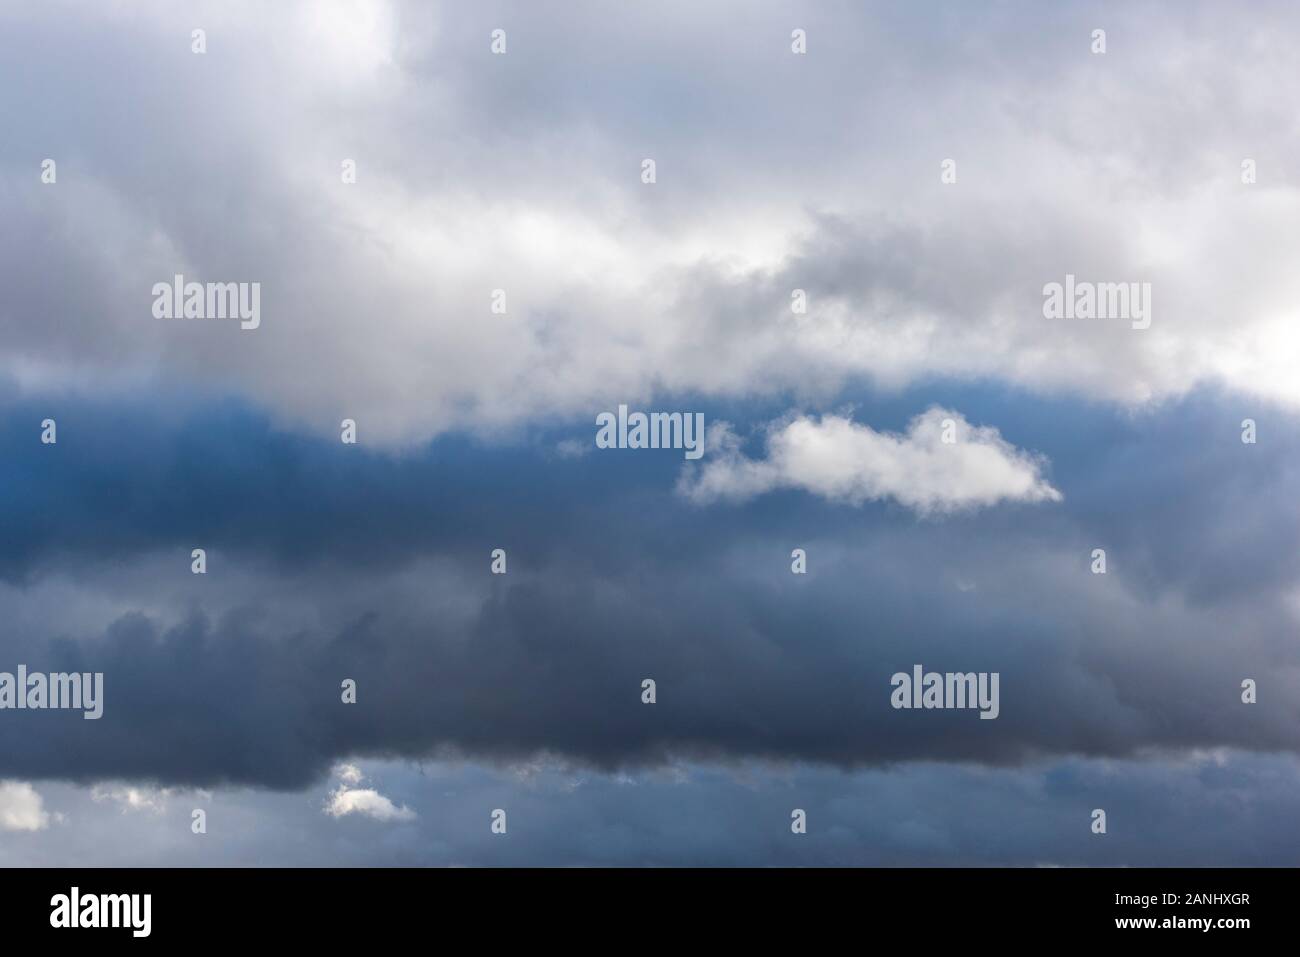 A moody grey sky with white clouds in stormy weather over the UK. A good bacground or wallpaper image Stock Photo